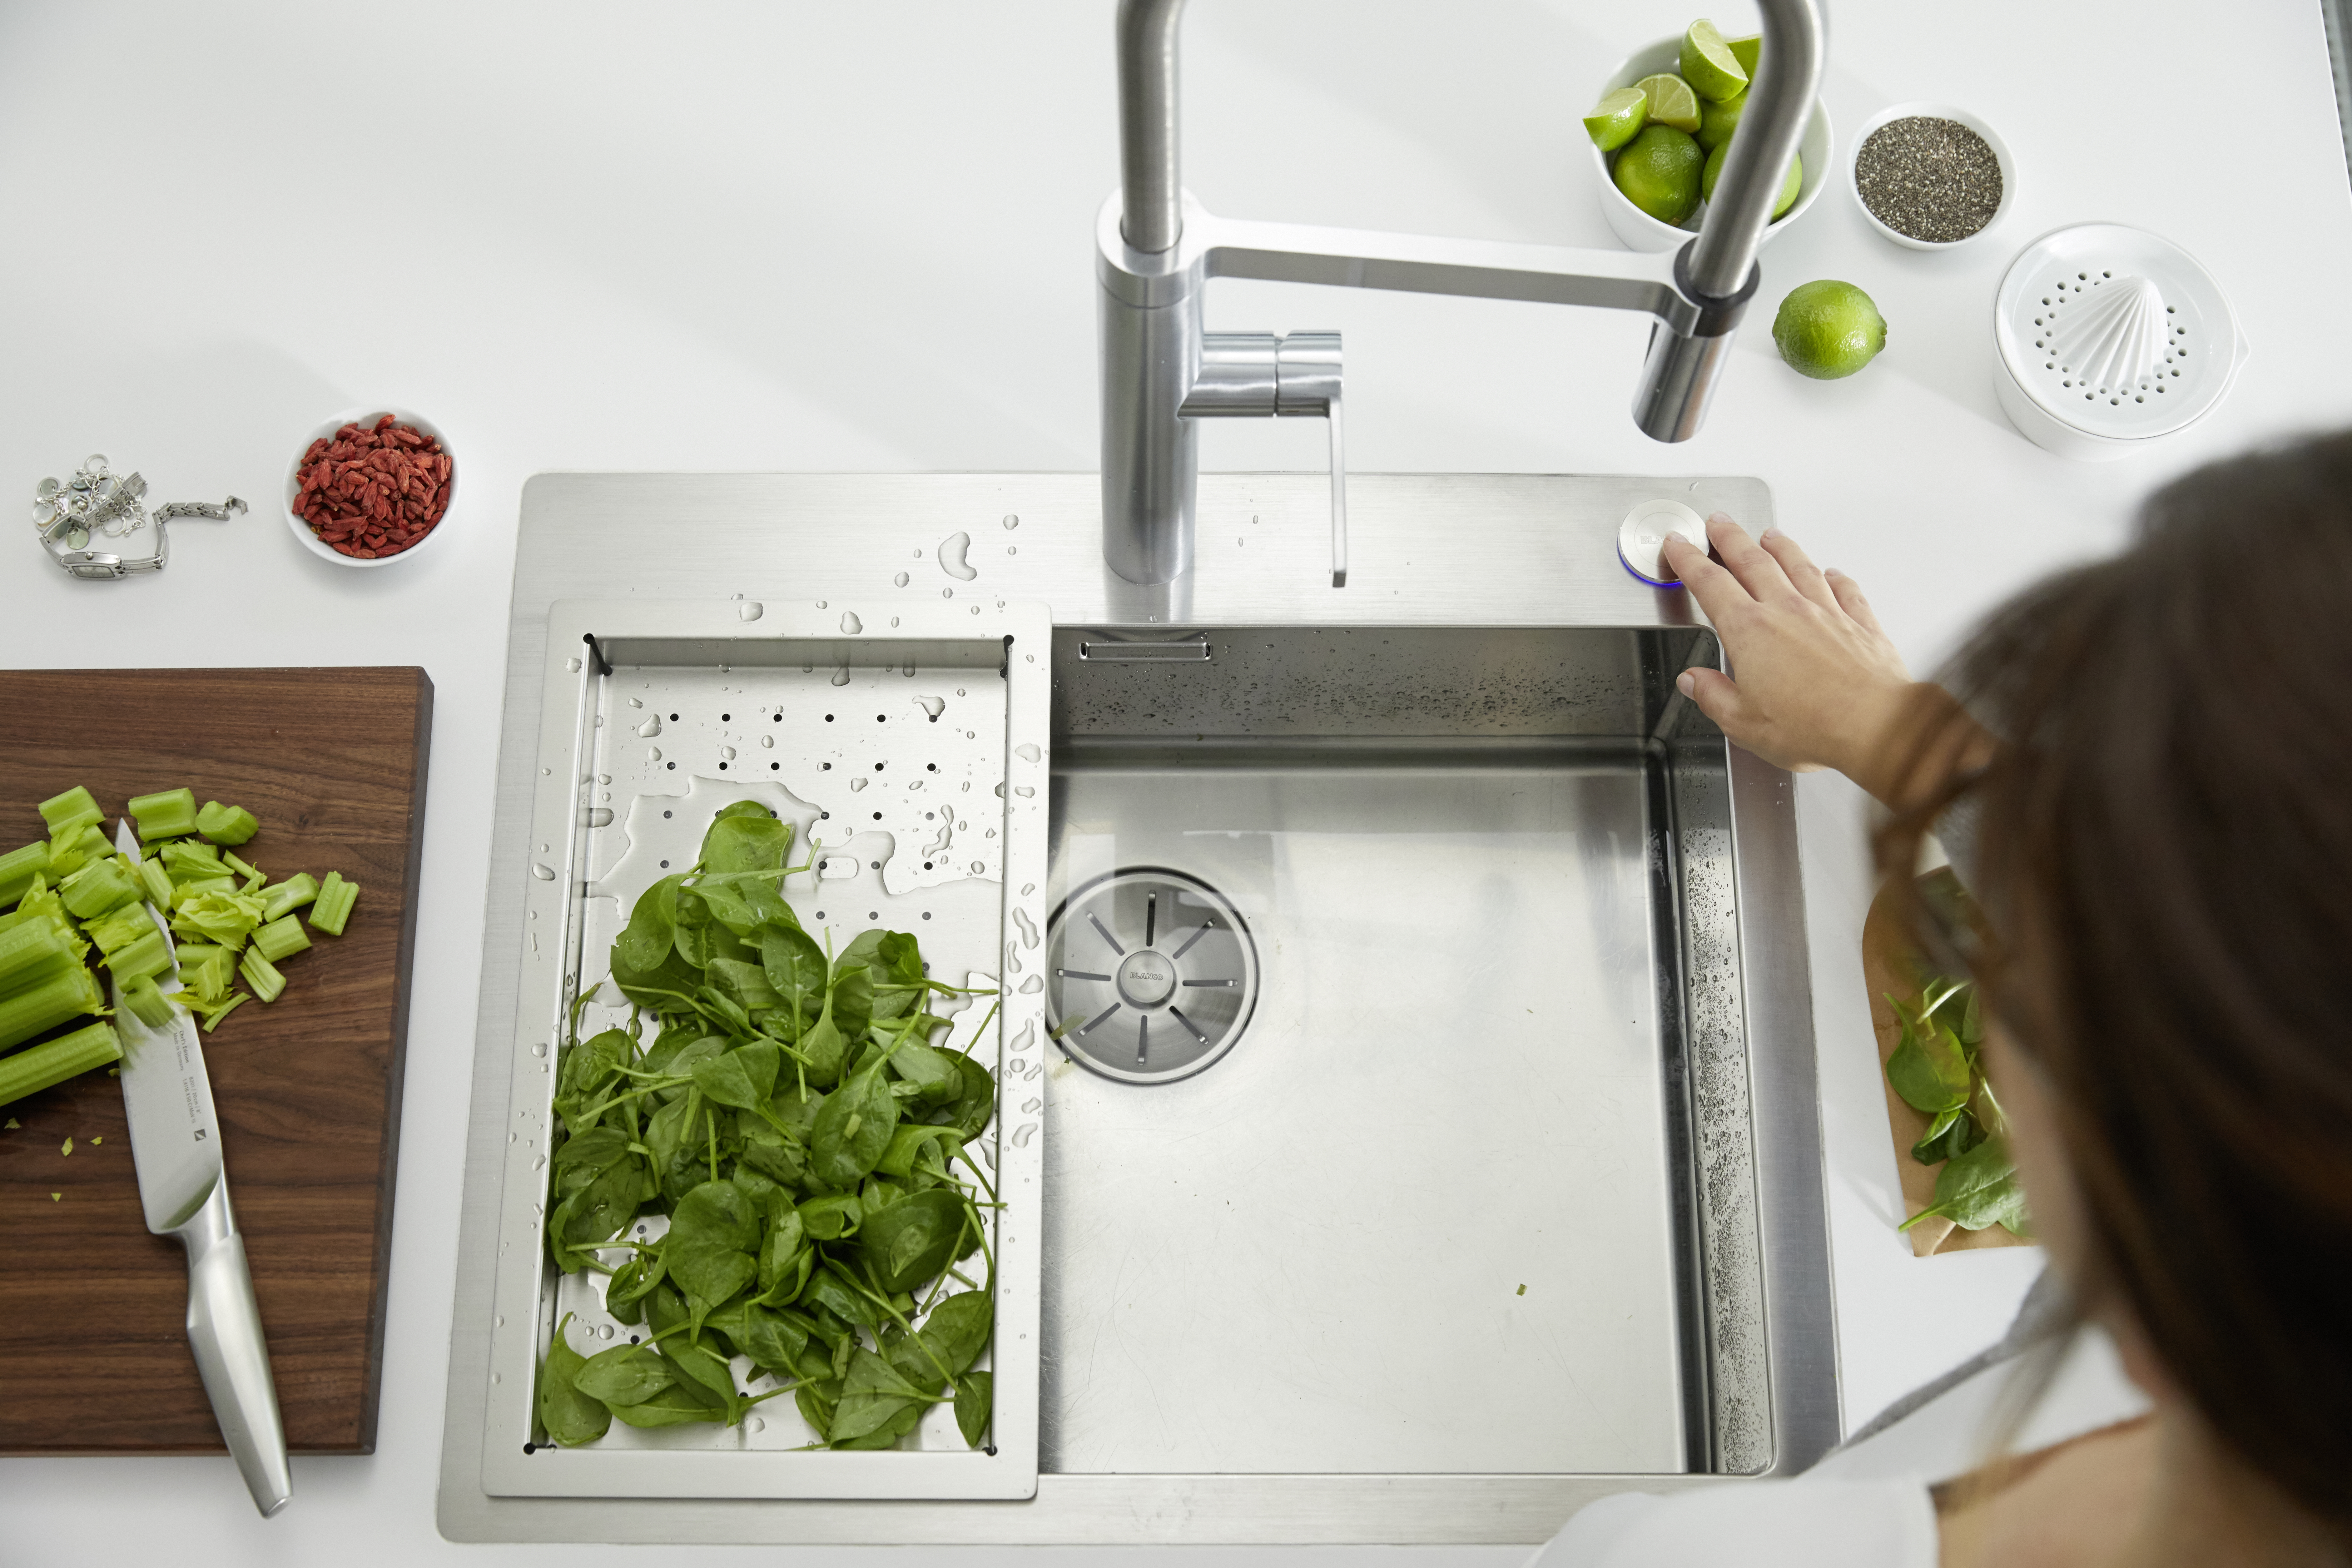 The stainless steel bowl works flexibly with the look of your sink unit